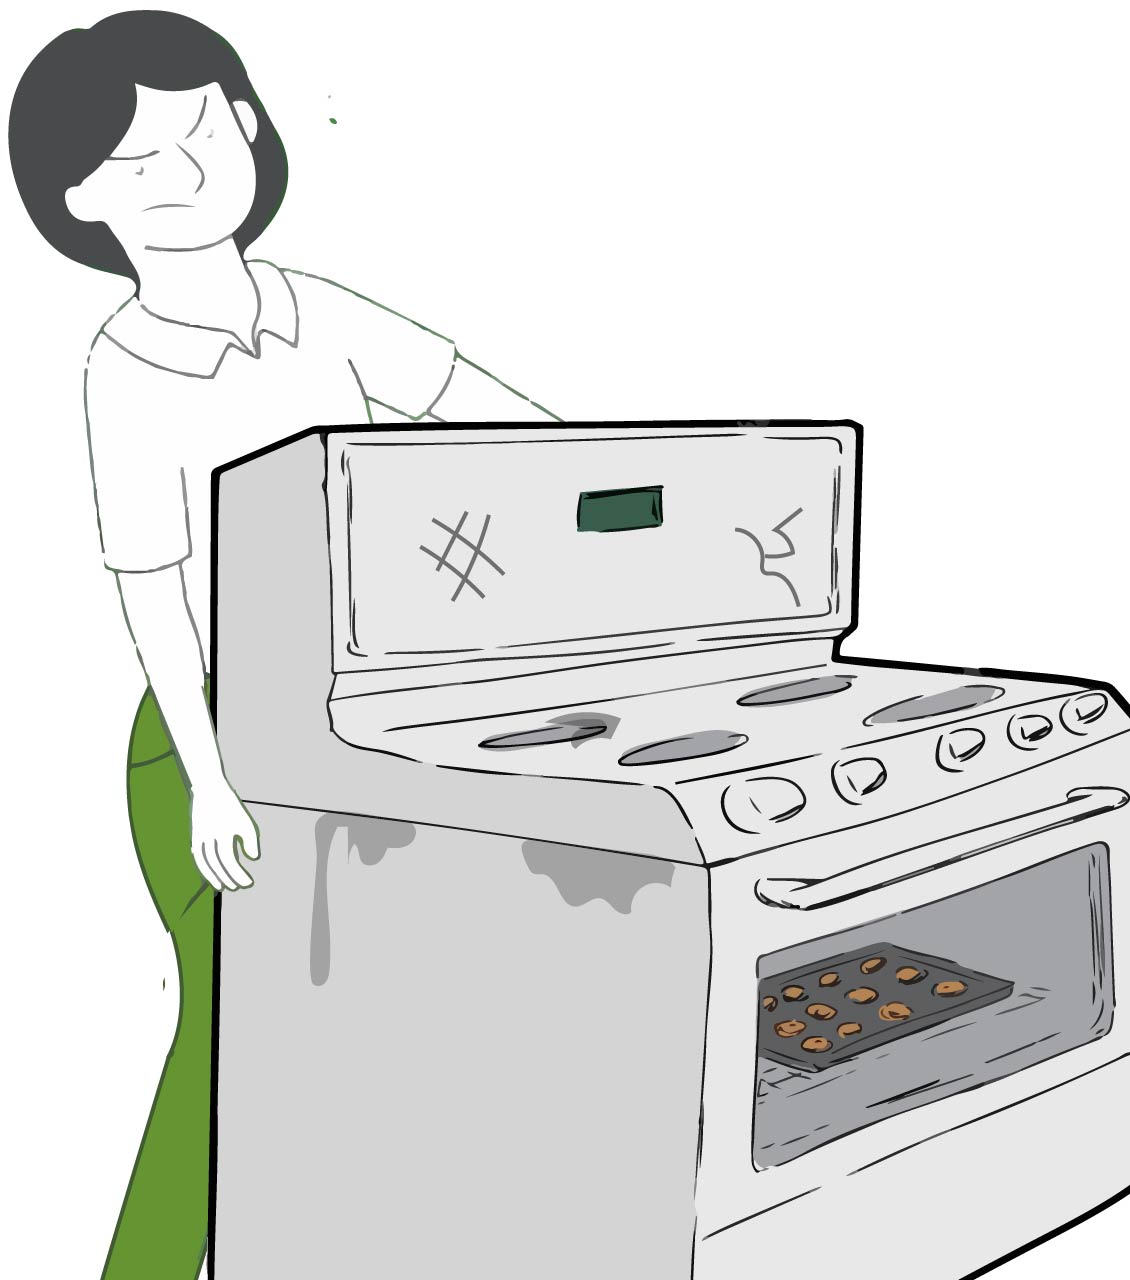 San Jose oven removal services